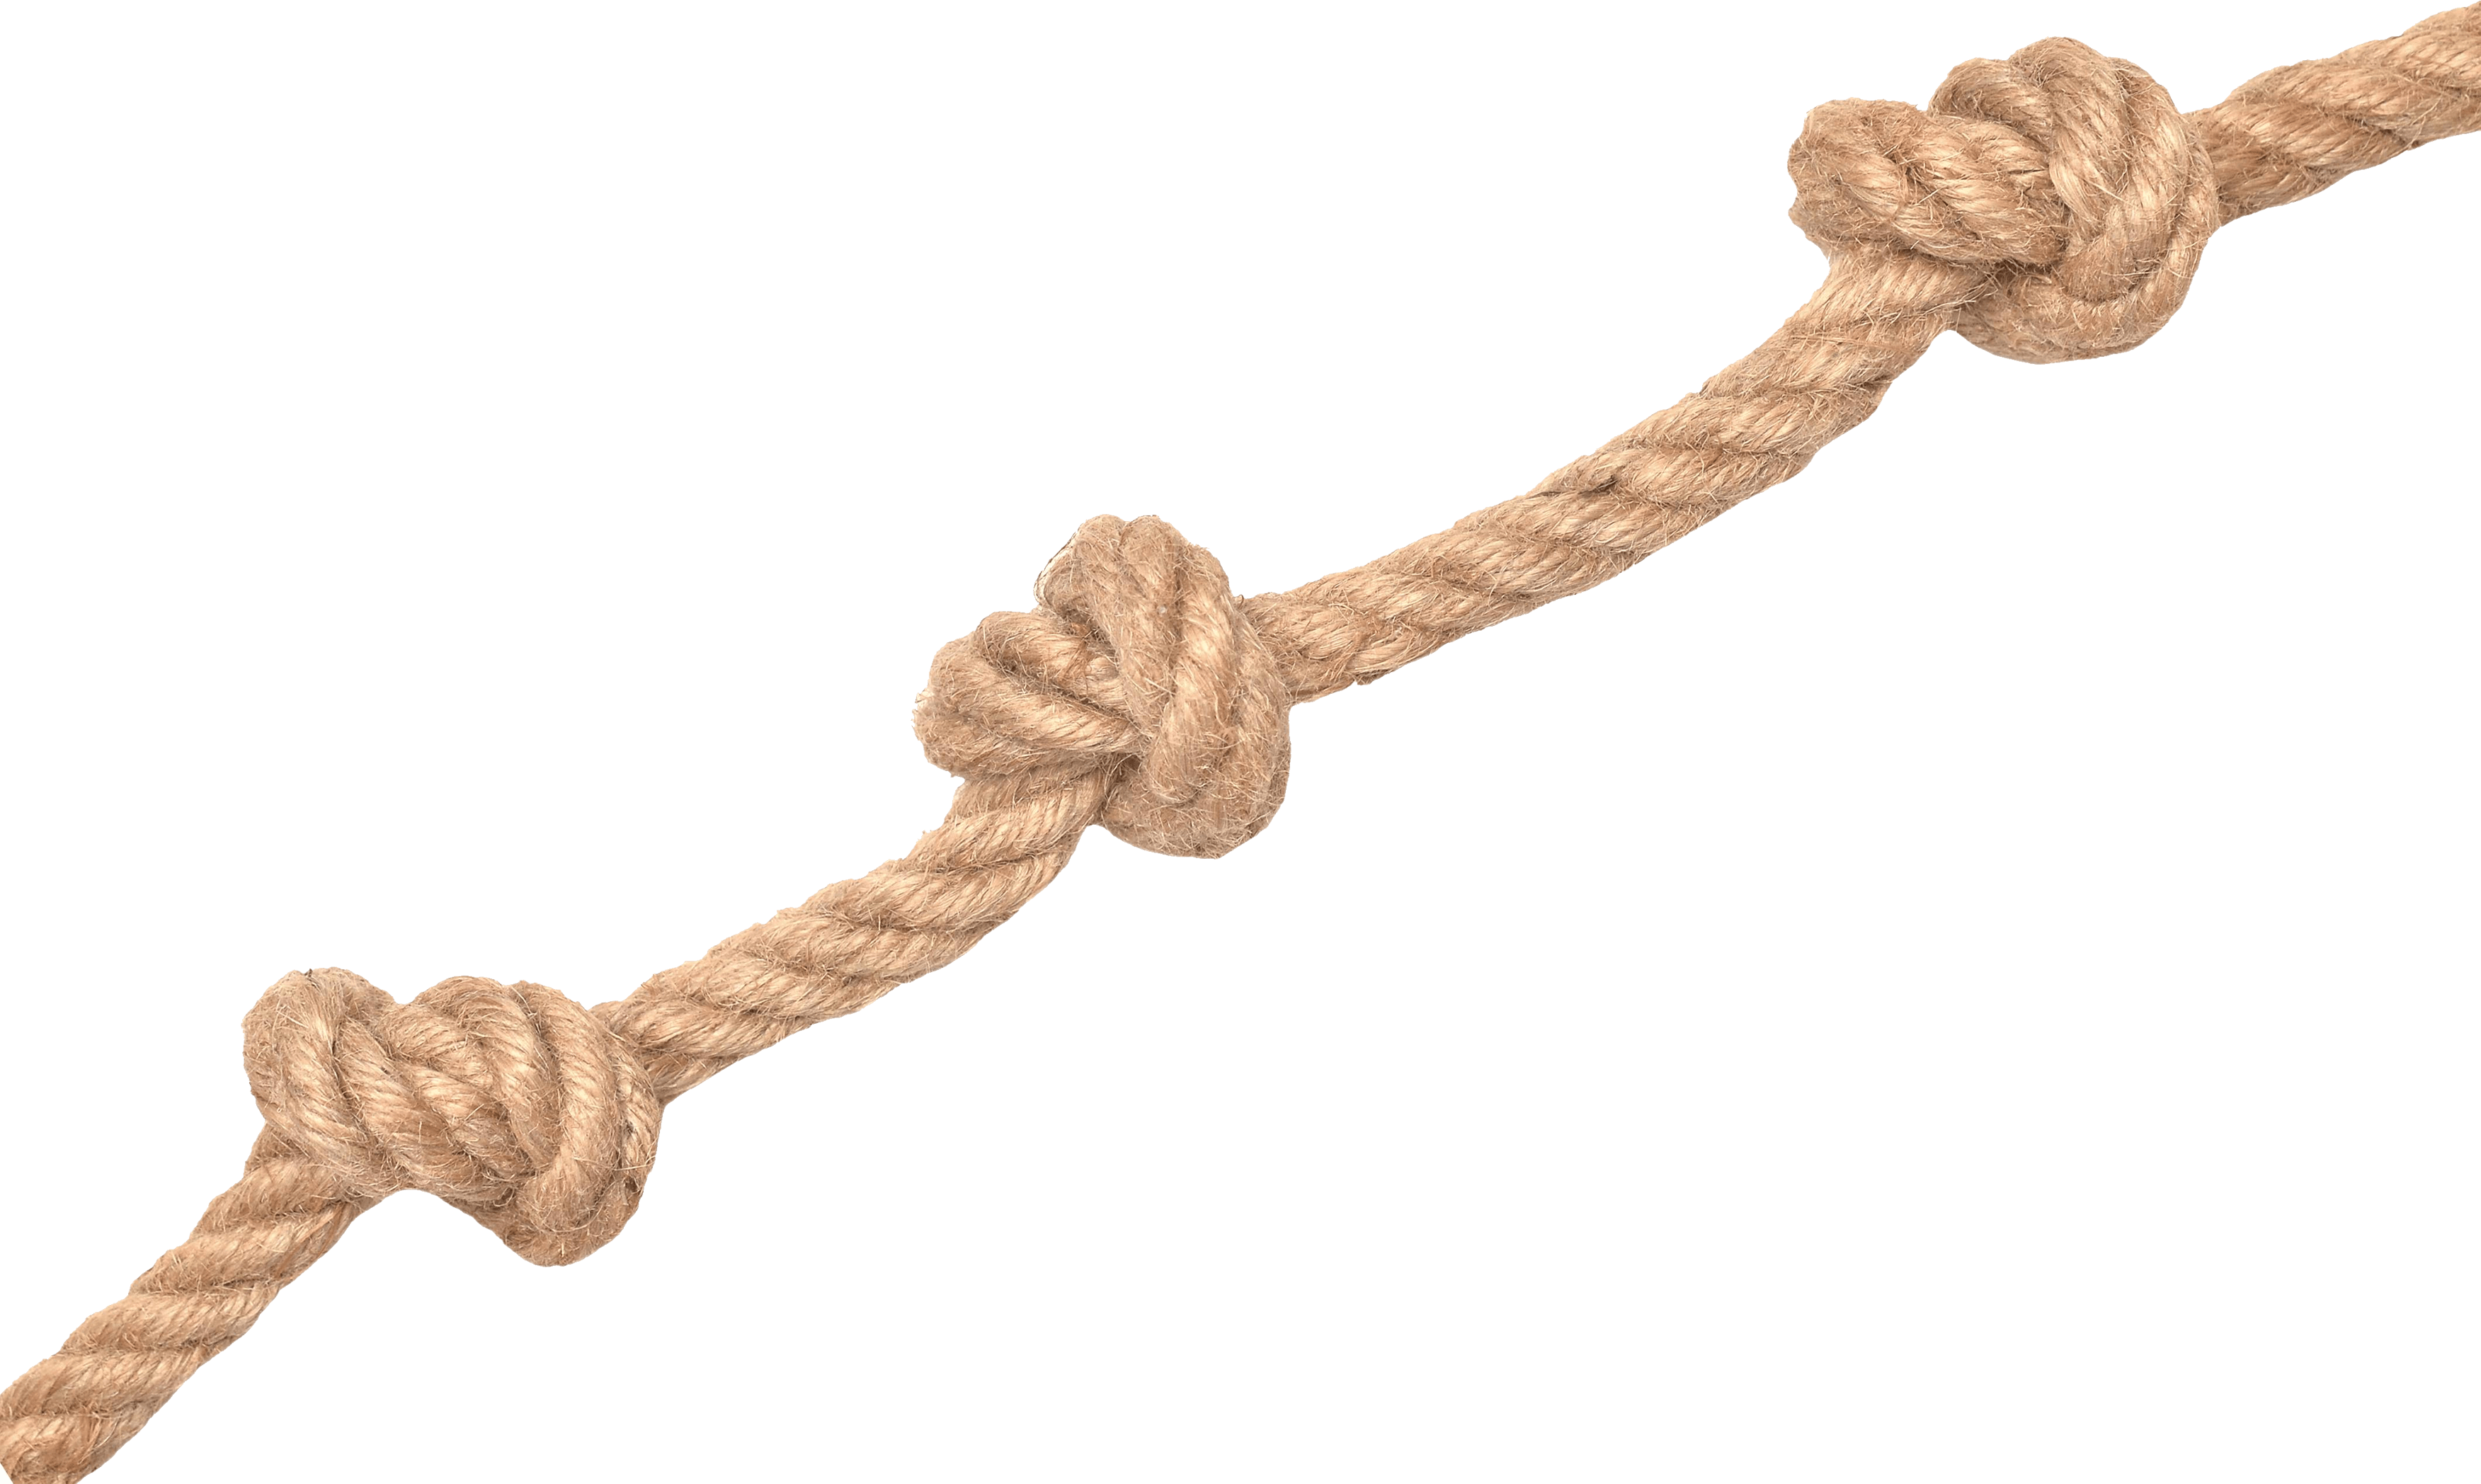 Rope Knots